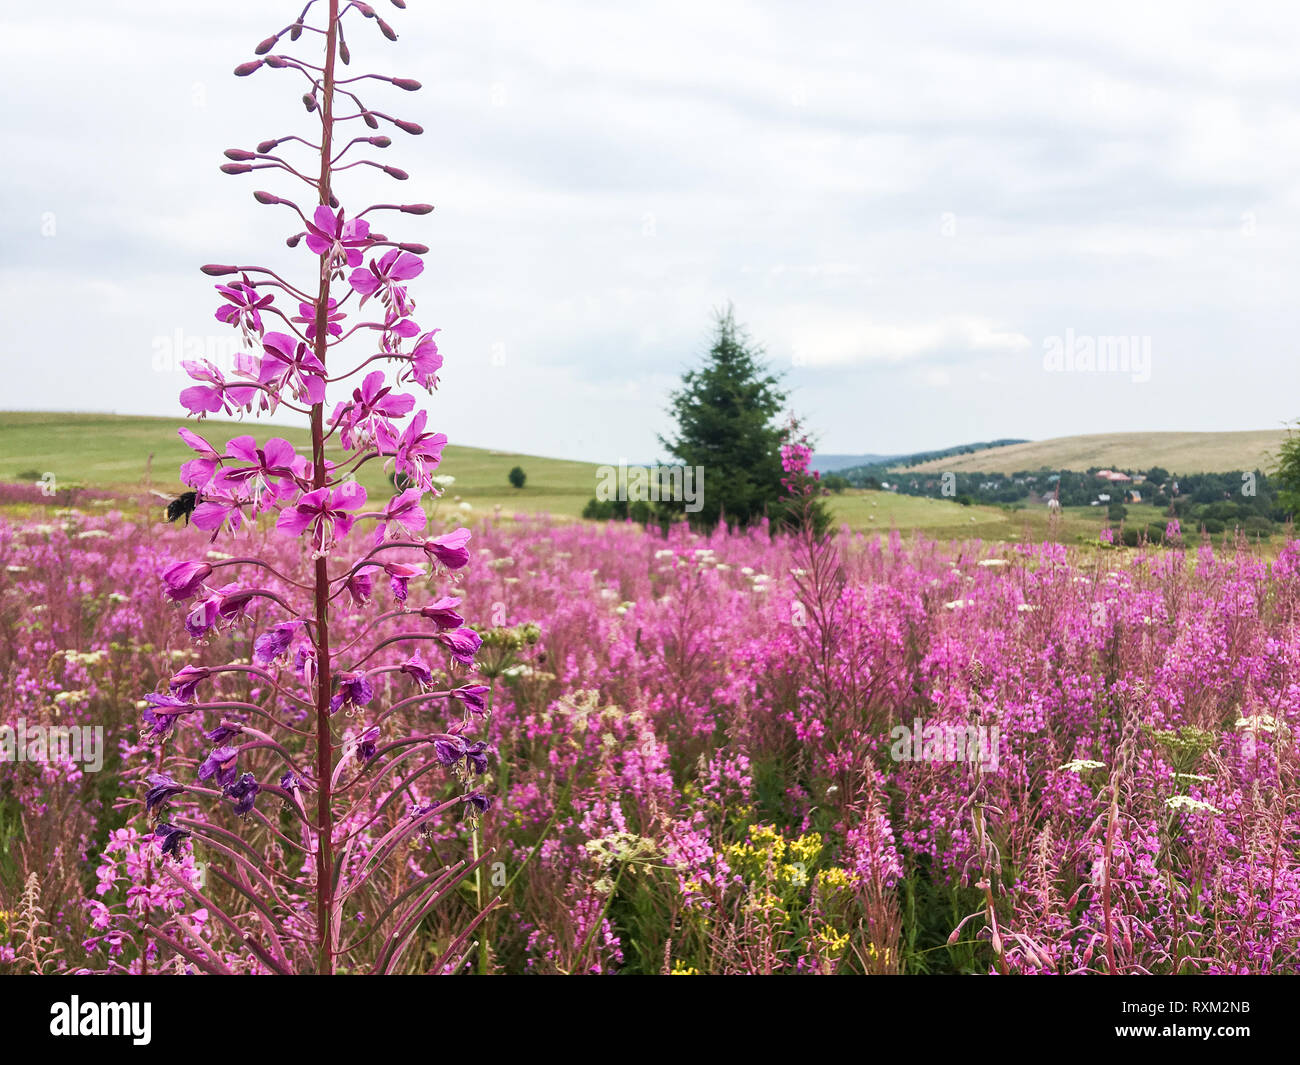 The outlook from the hill full of beautifull pink flowers in the mountains in Czech republic. Stock Photo